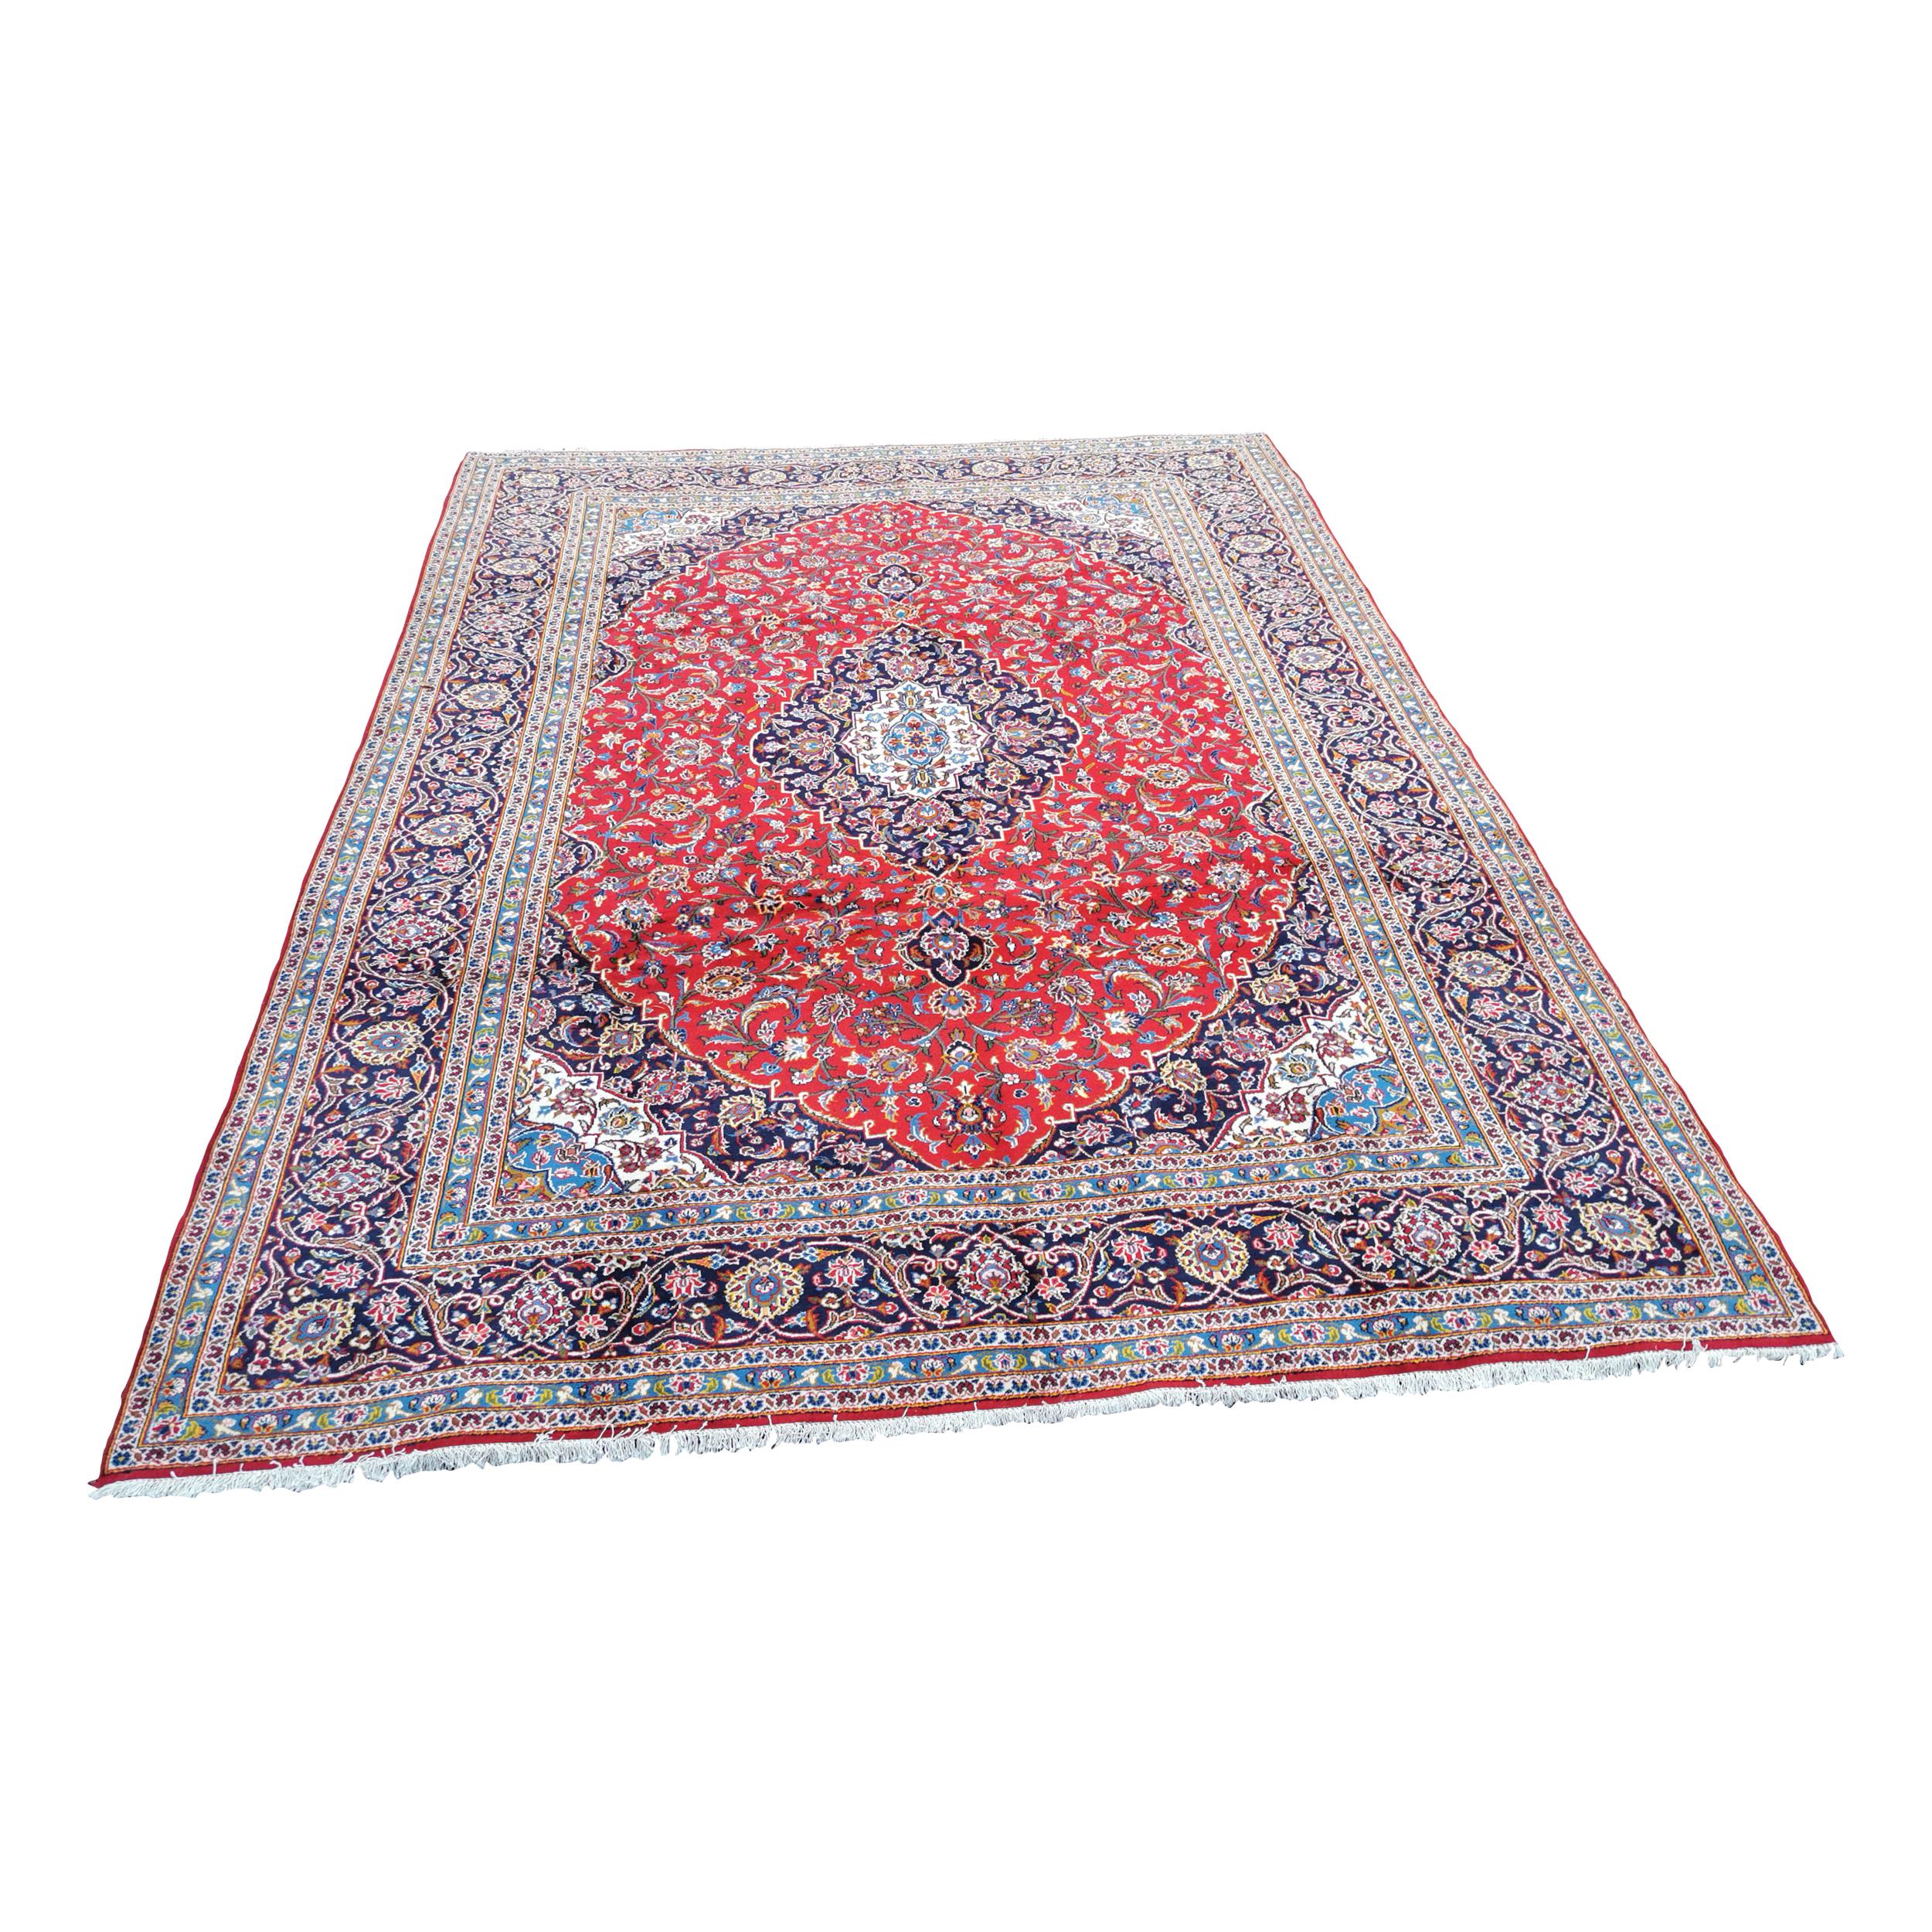 Good quality hand knotted Persian carpet square {342 cm L x 243 cm W}.